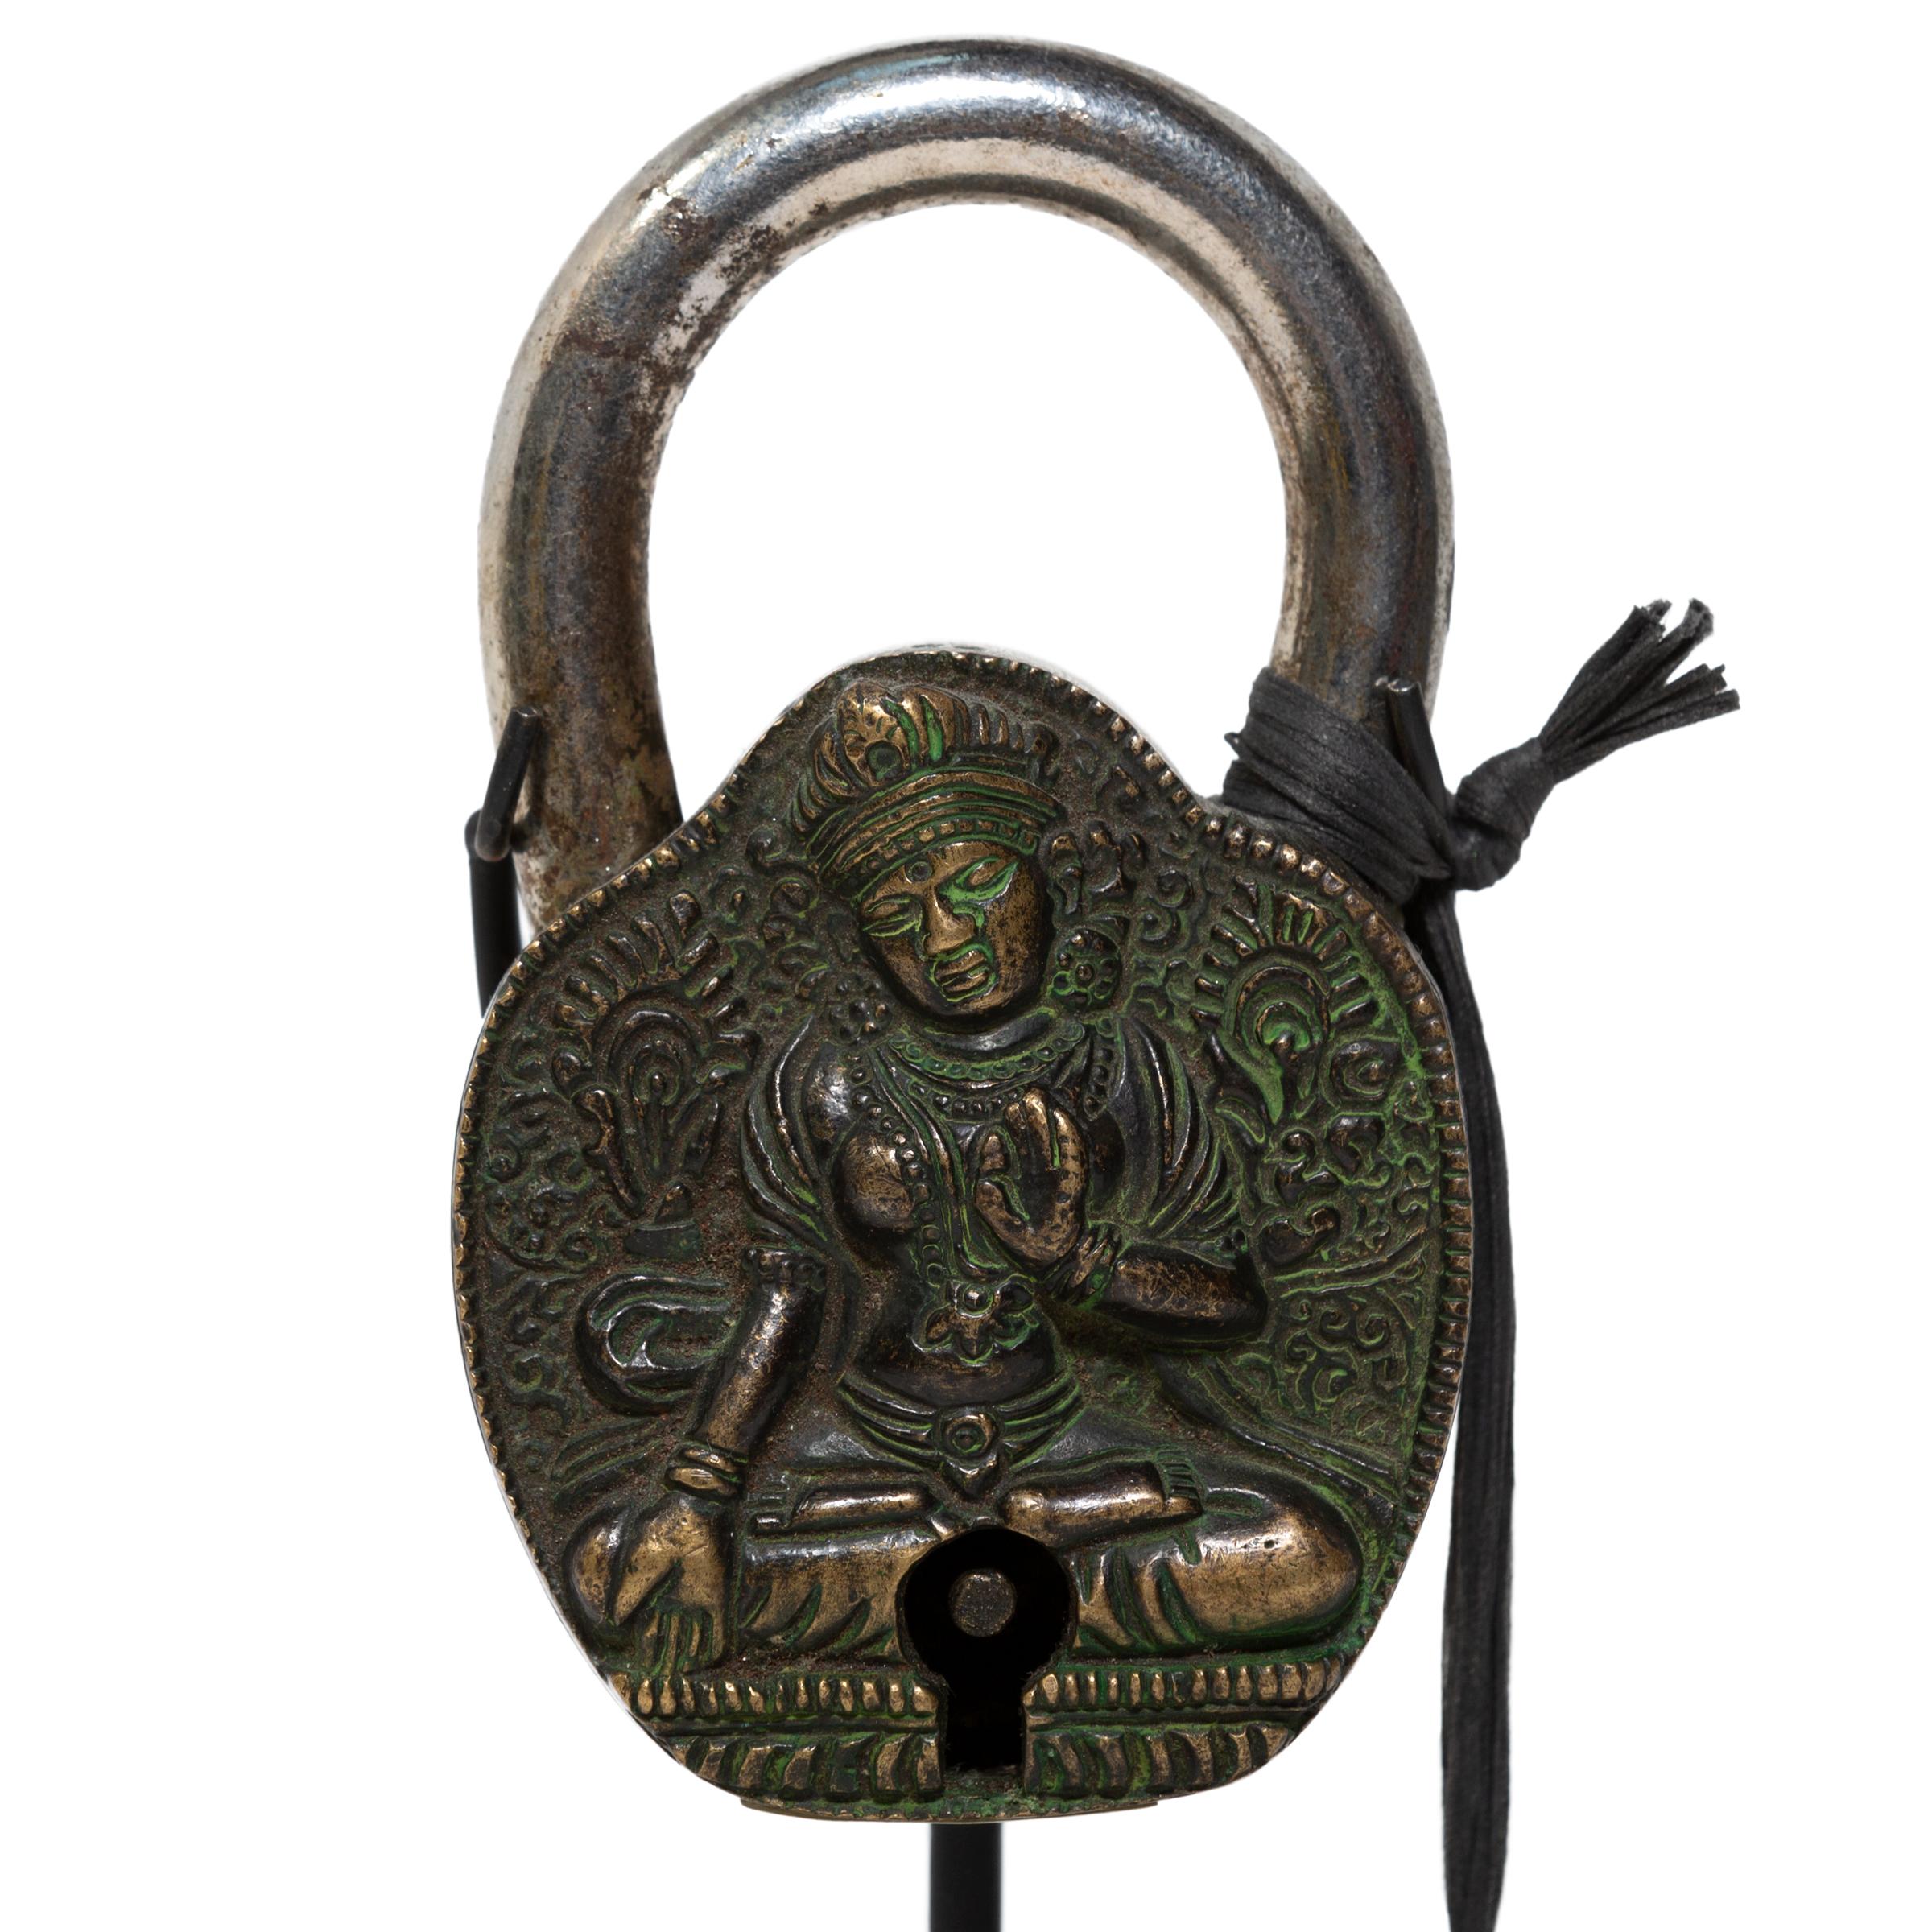 Cast in high-relief with intricate detail, this fully functional padlock is a fantastic example of 19th-century Tibetan metalwork. The lock depicts the female bodhisattva known as Jetsun Dölma, or White Tara. Seated upon a lotus throne, she holds